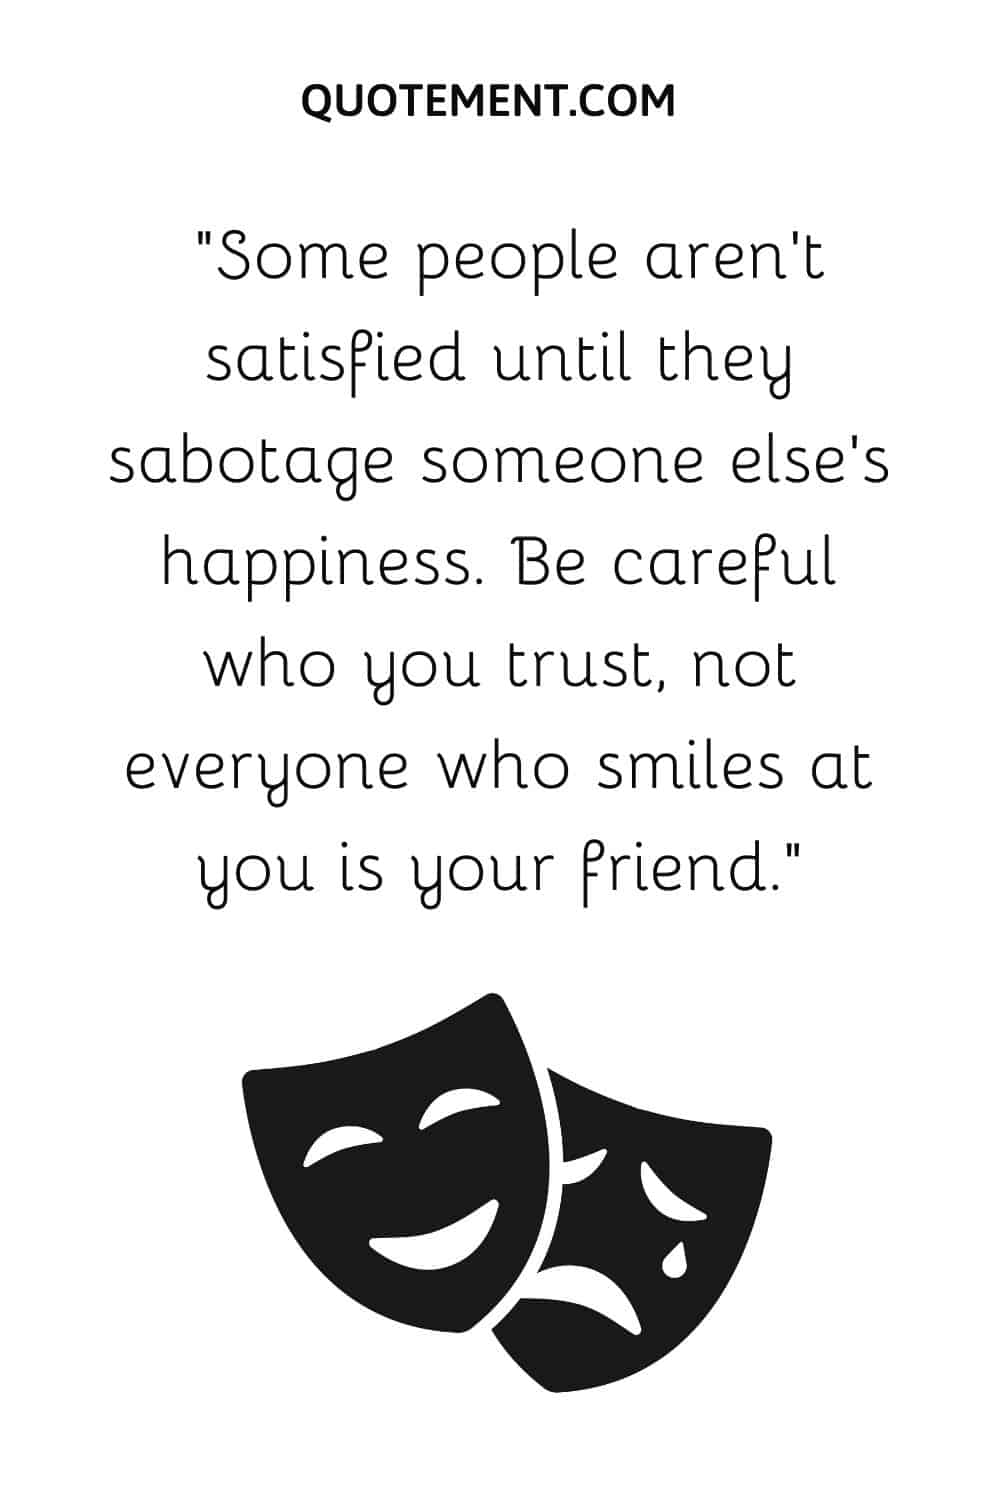 Some people aren’t satisfied until they sabotage someone else’s happiness